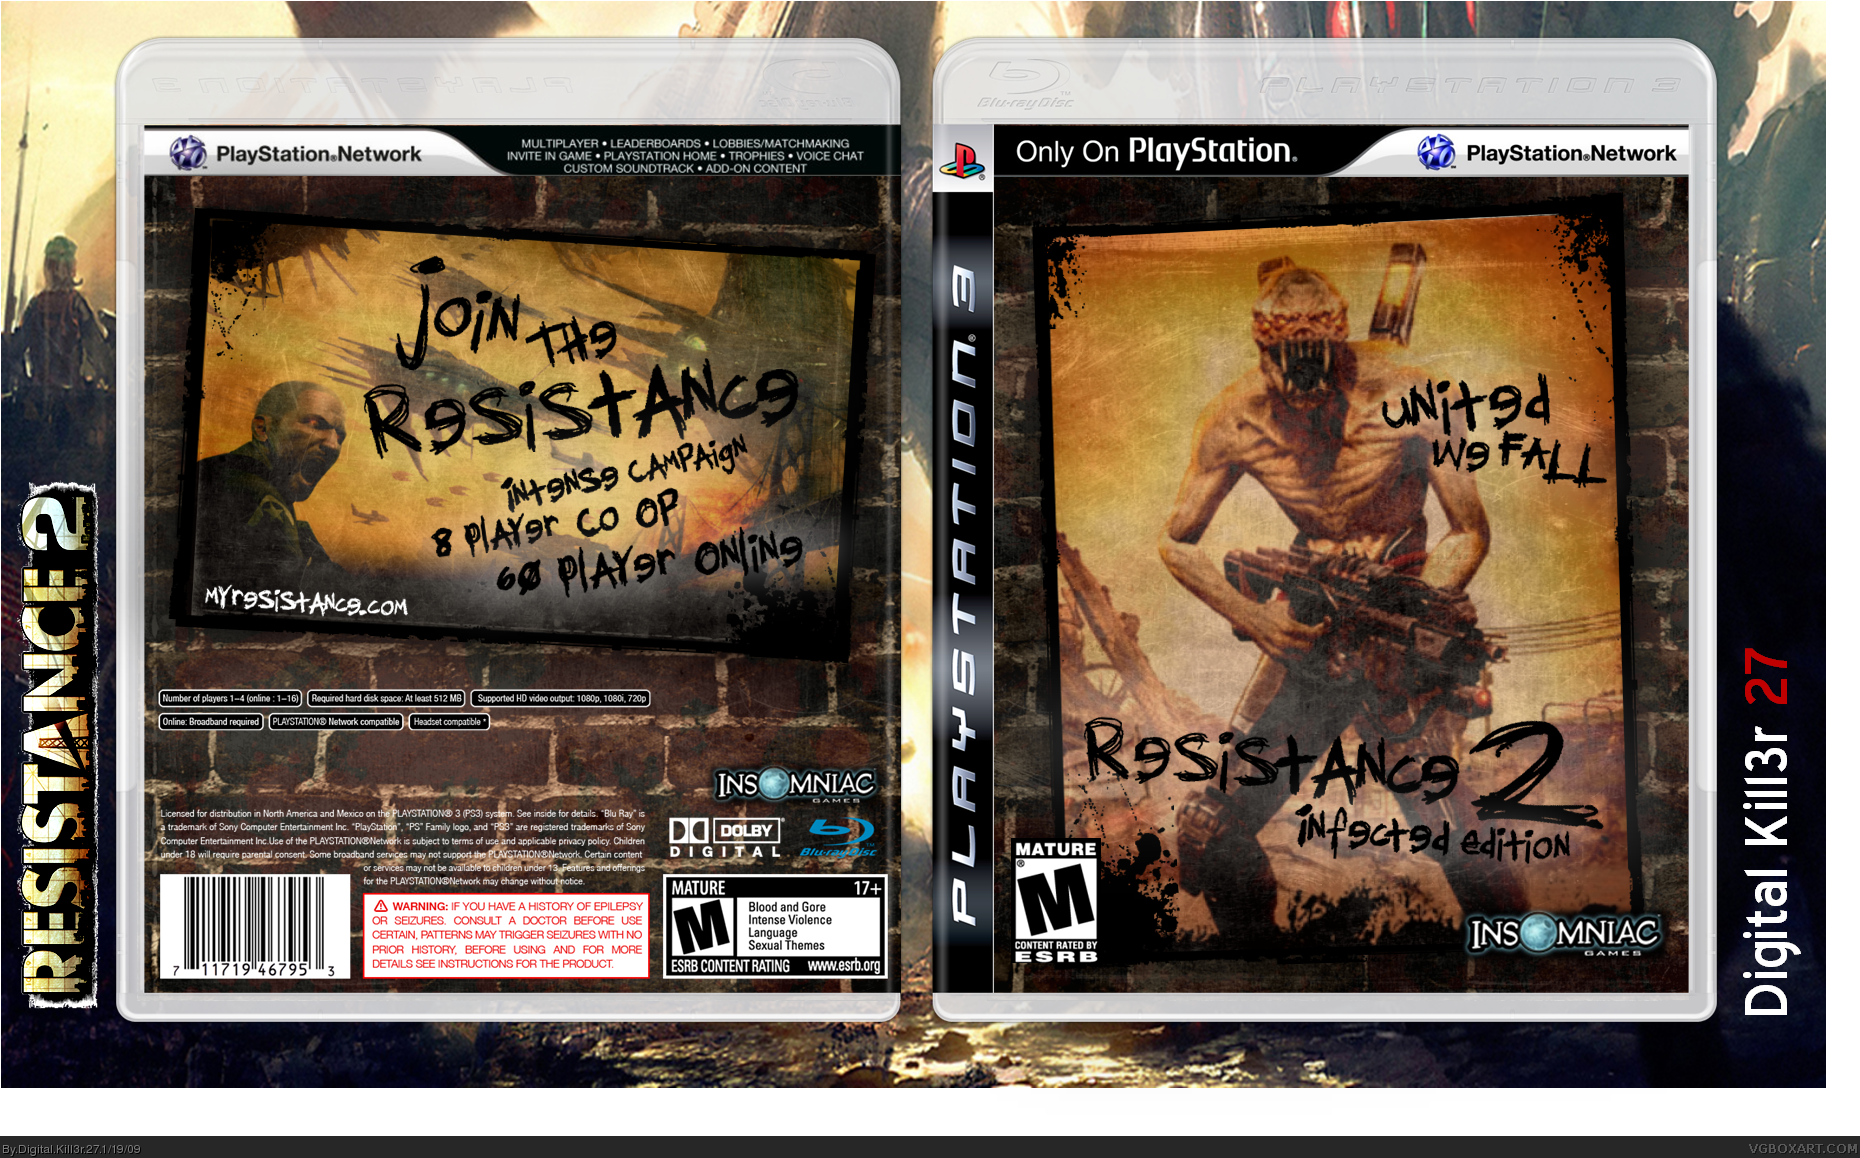 Resistance 2: Infected Edition box cover